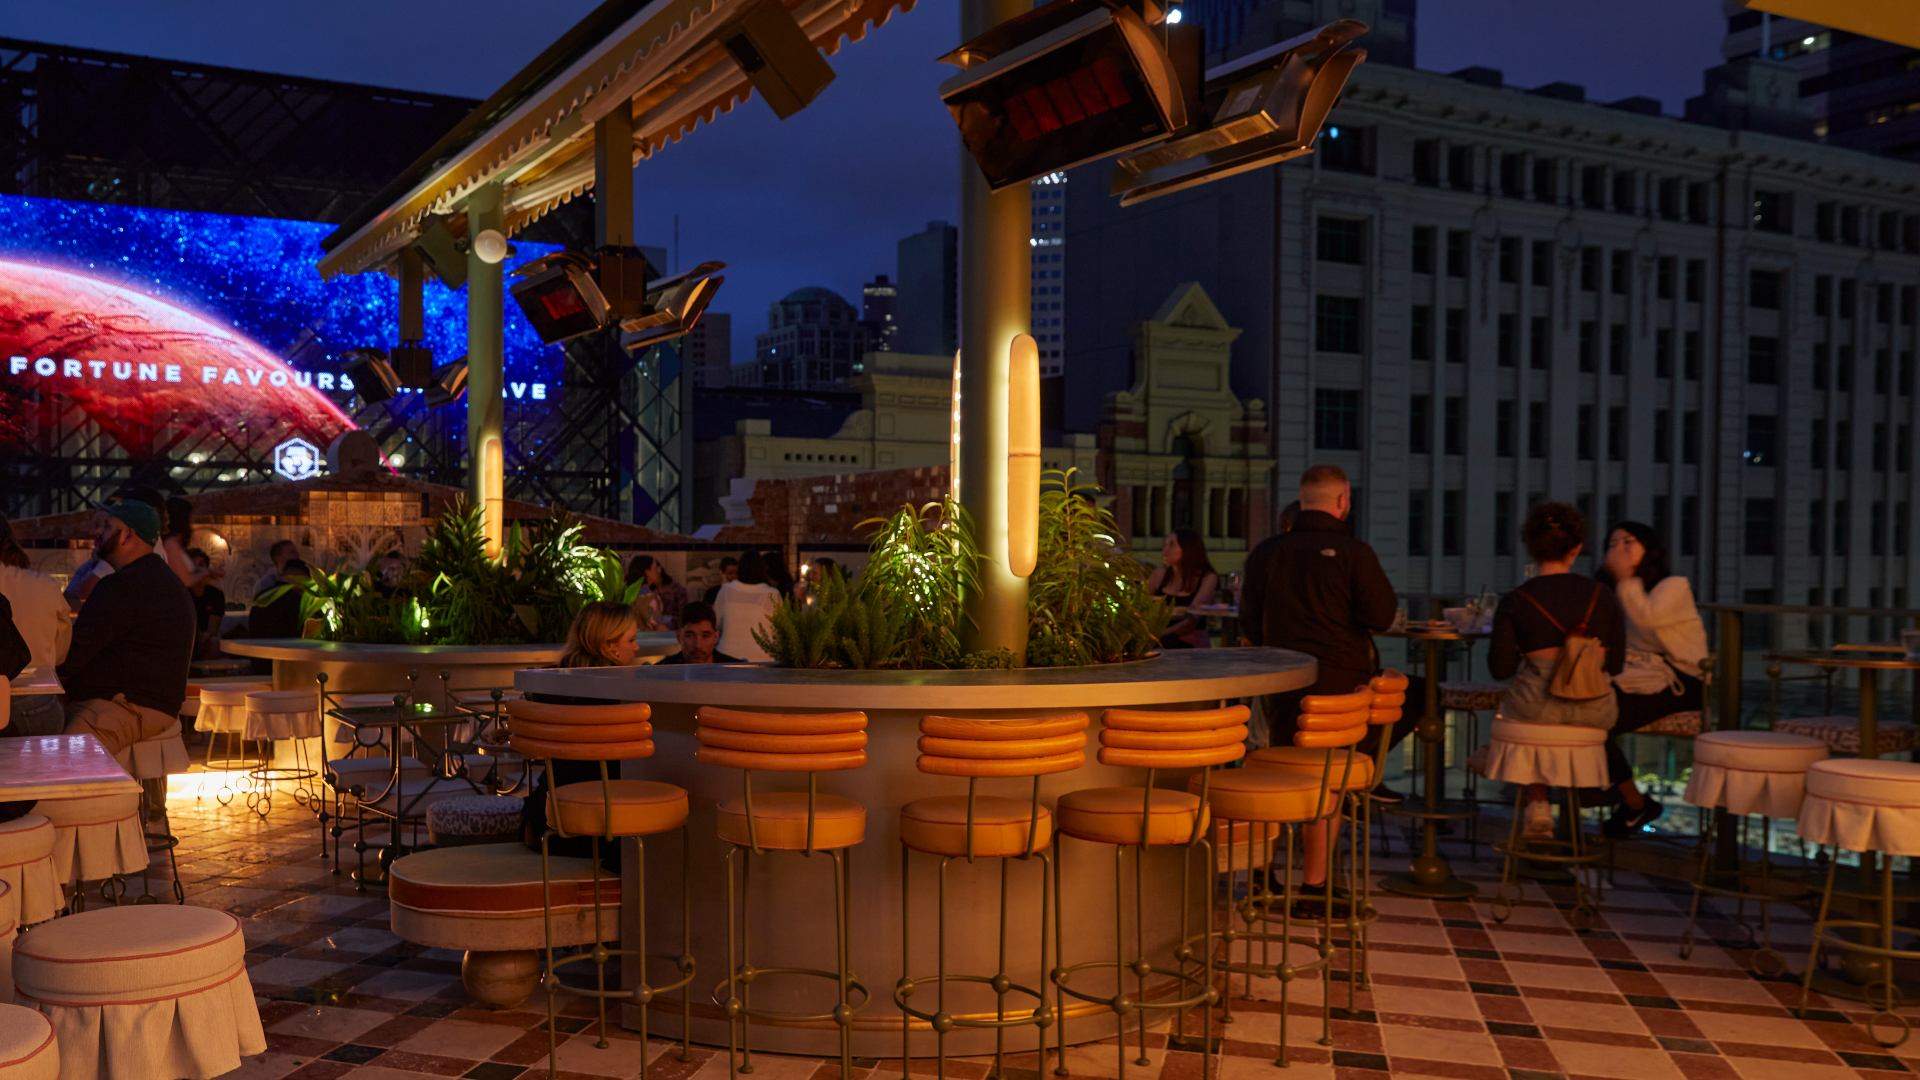 A Garden Party-Inspired Rooftop Bar Is the Crowning Glory of the Newly Launched HER Building